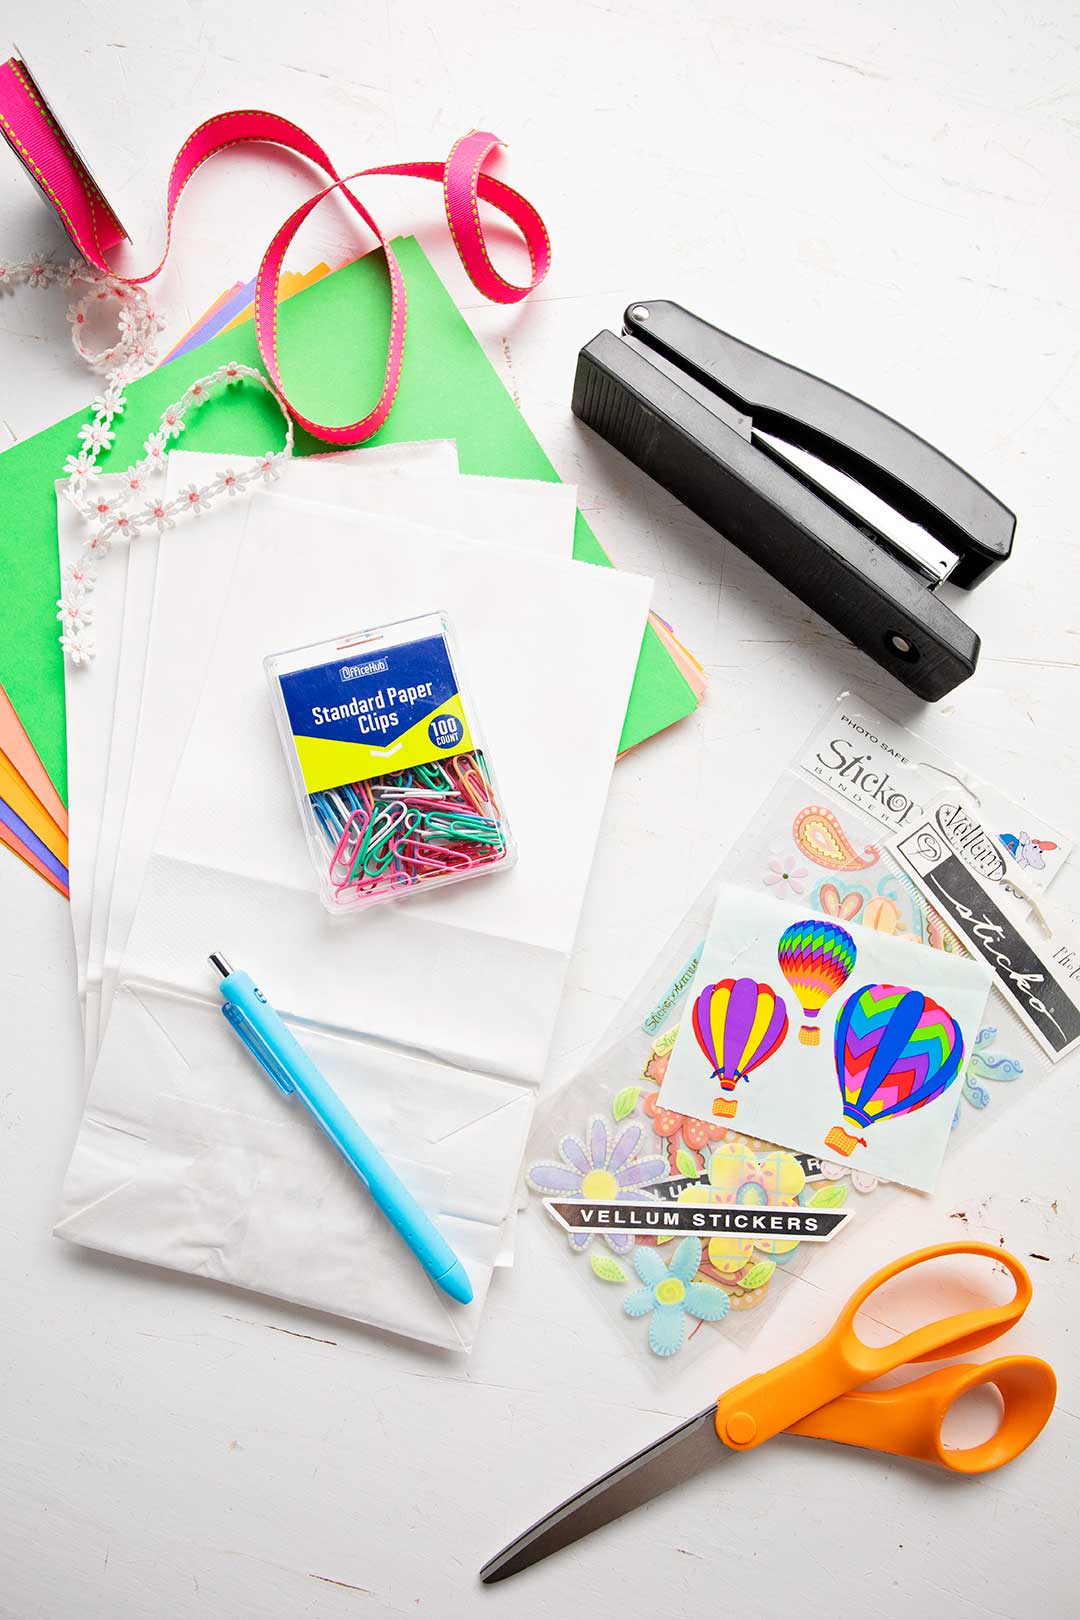 Supplies for a paper bag book. Stapler, scissors, stickers, pen, colorful paper clips, white paper bags, colorful paper and pink ribbon.